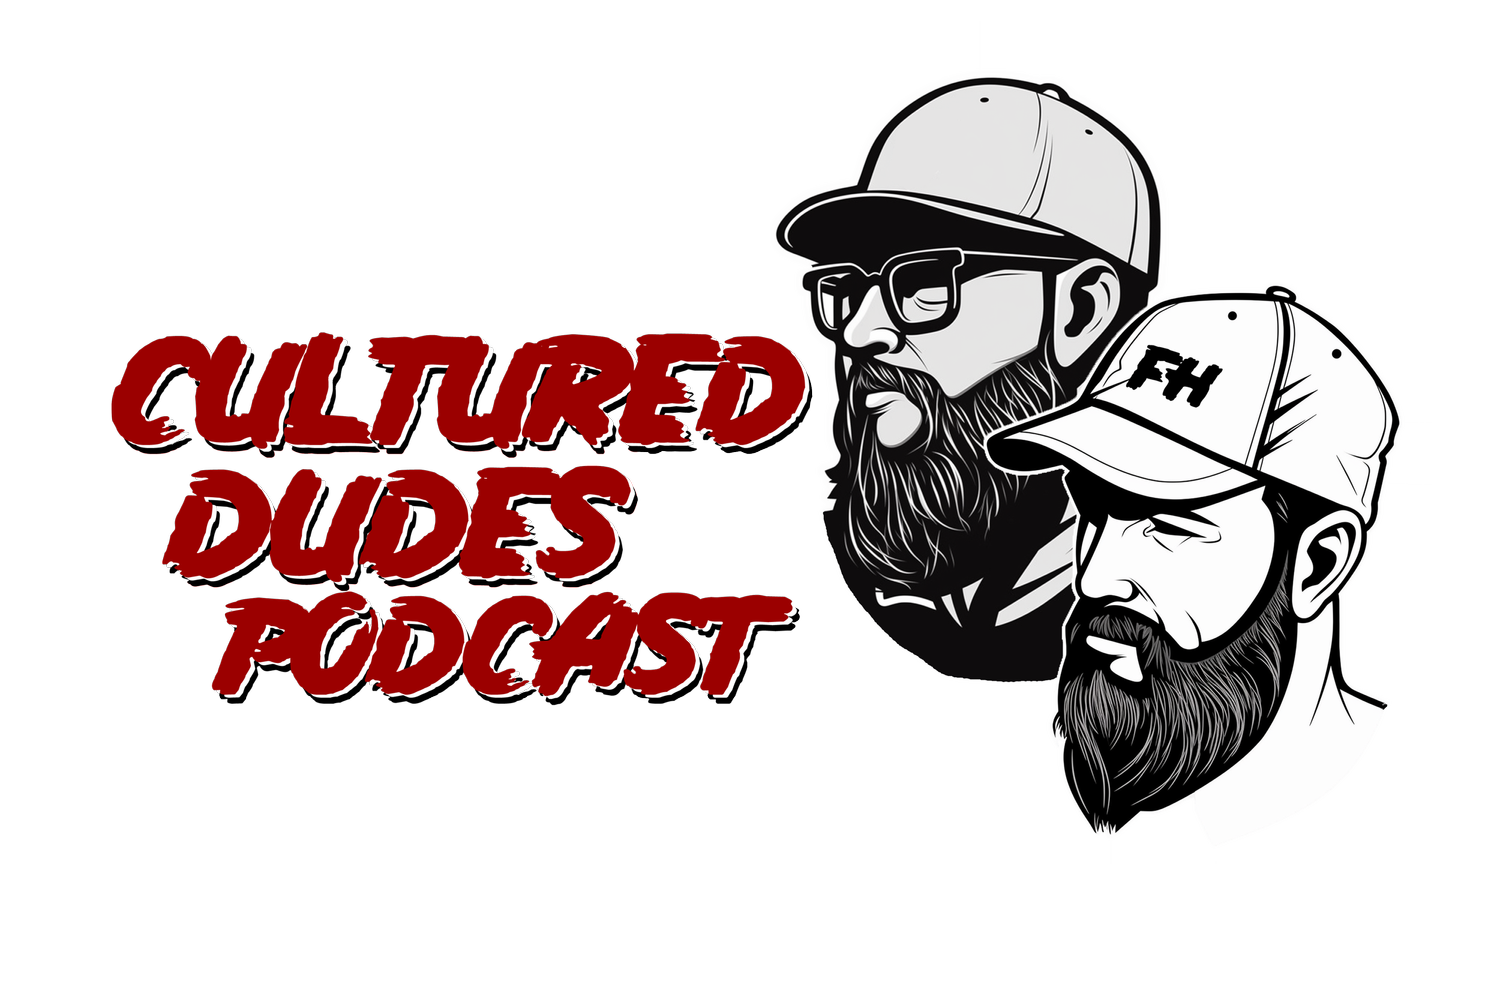 The Cultured Dudes Podcast